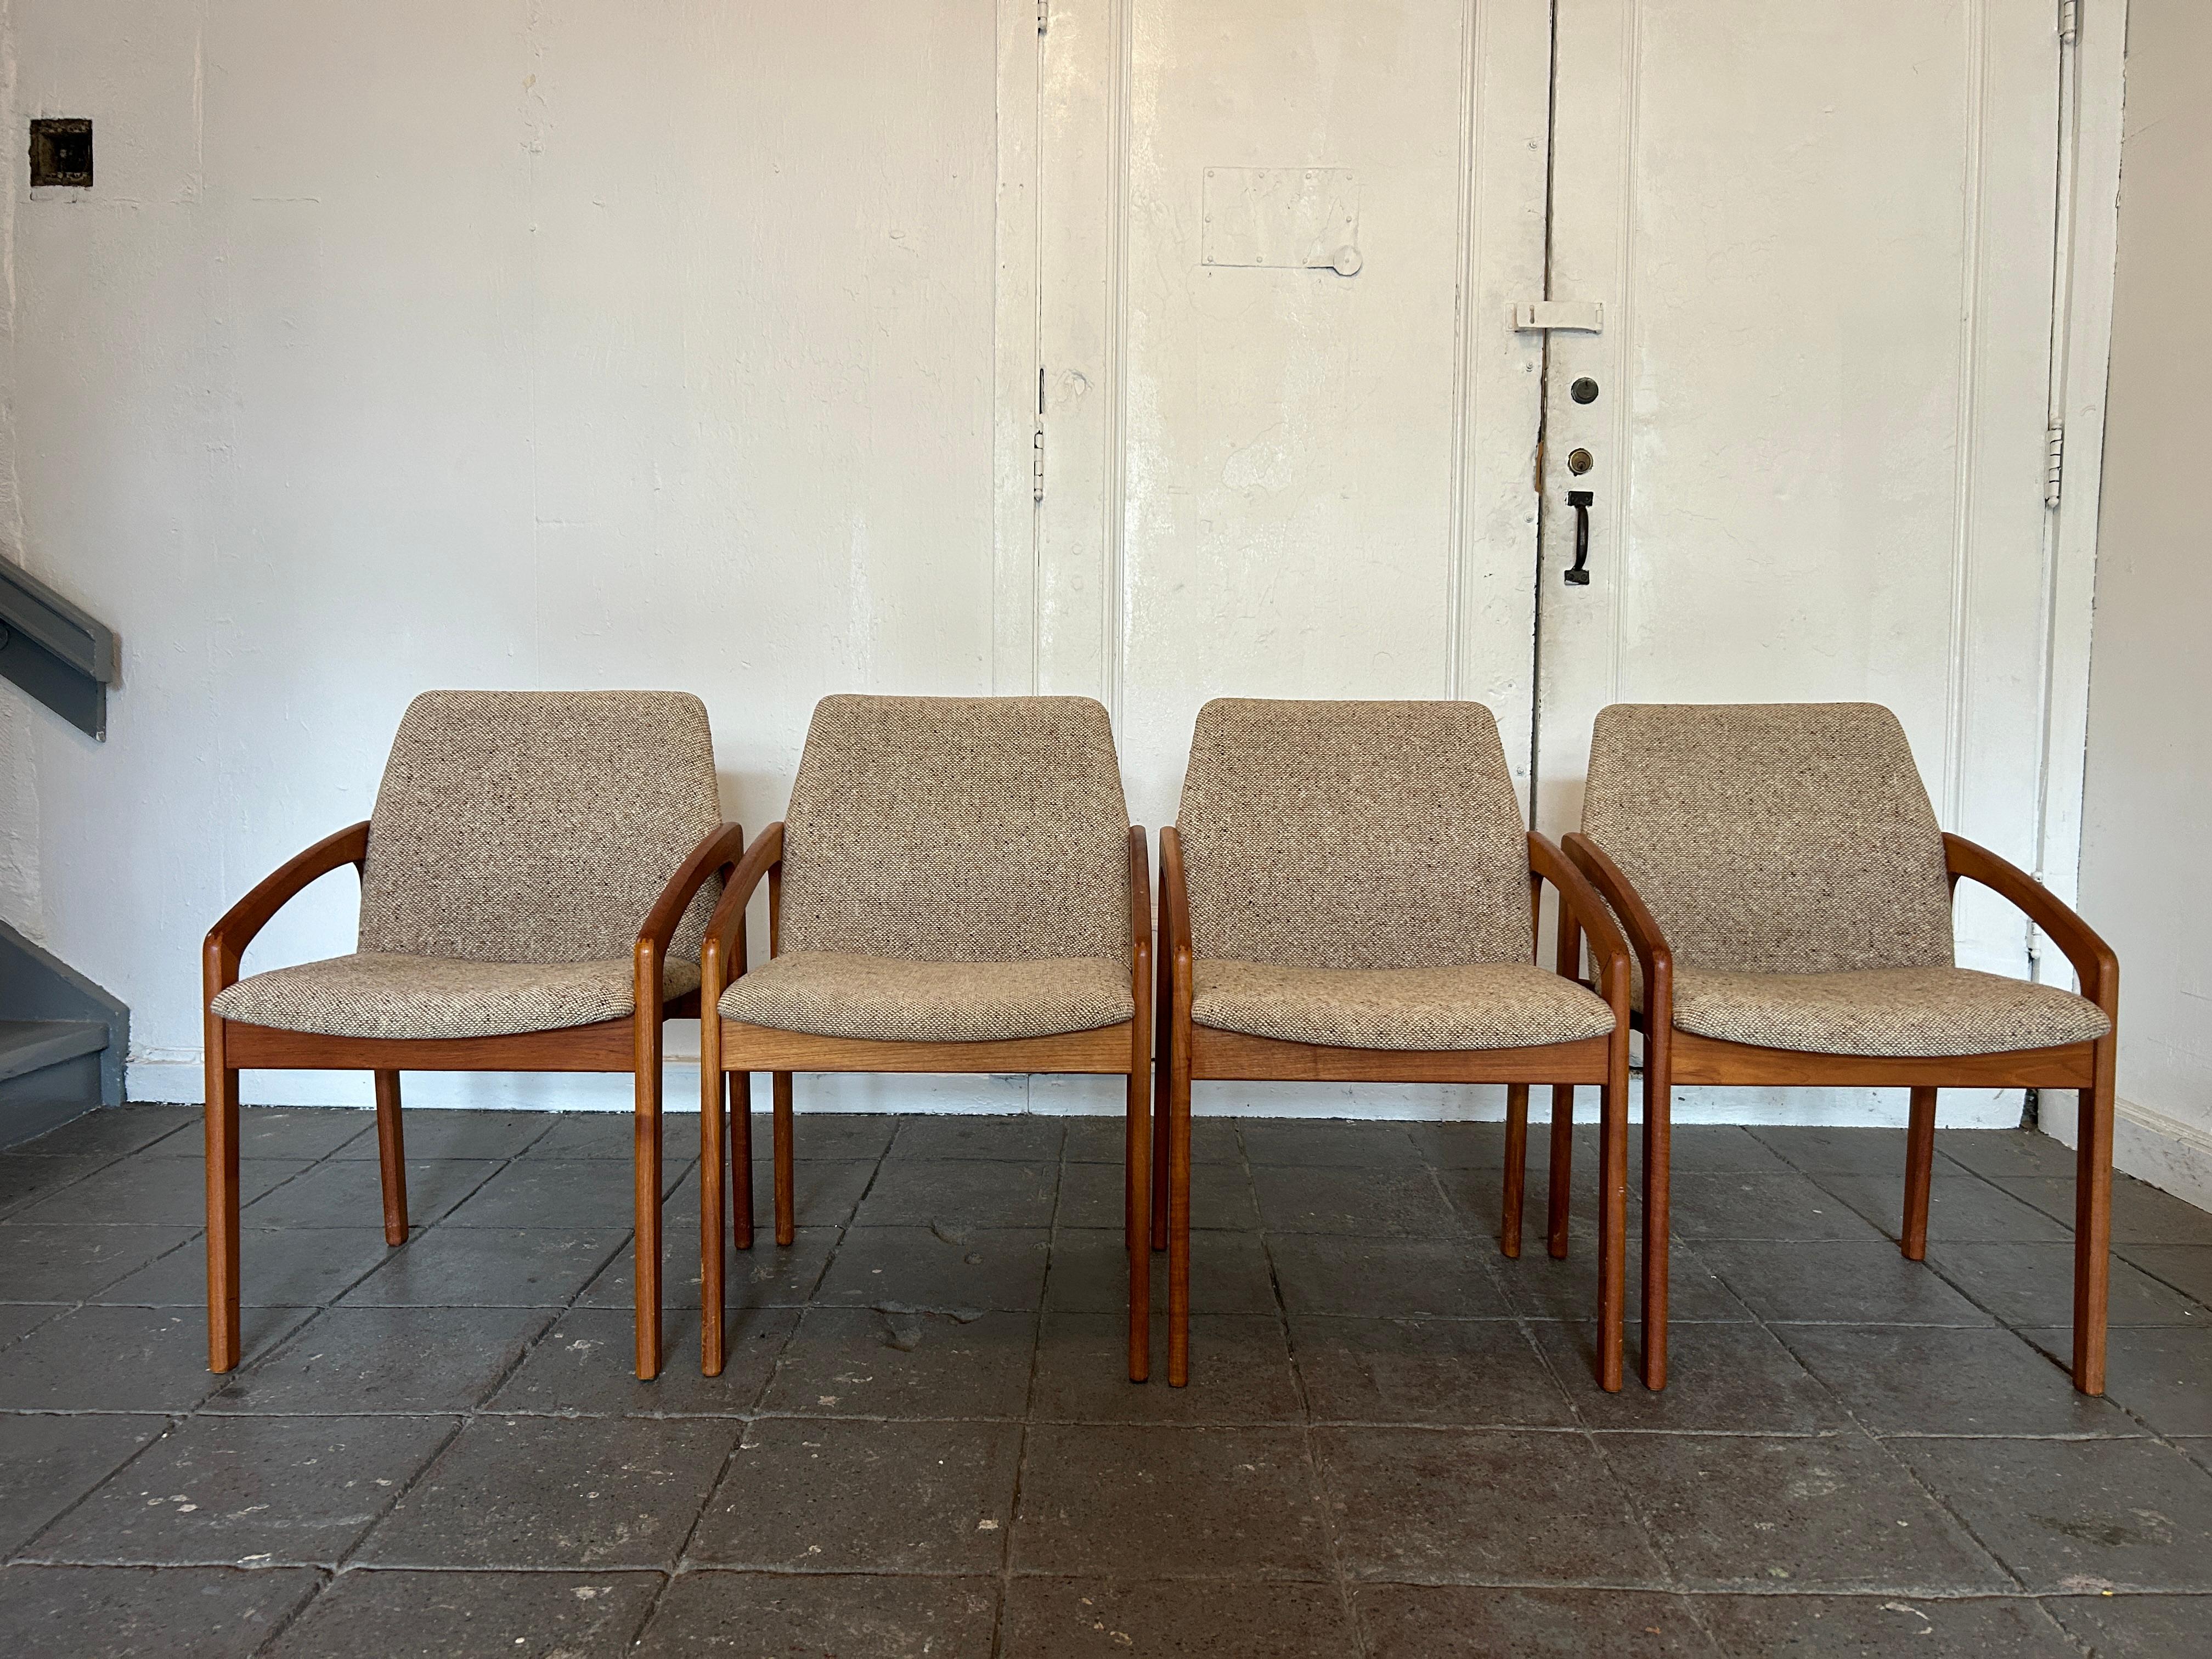 A set of (4) teak dining chairs by Danish master designer Kai Kristiansen for KS Mobler. These elegant chairs have solid teak frames with sweeping lines and very comfortable curved upholstered seats and backs. The downward swoop of the arms allow